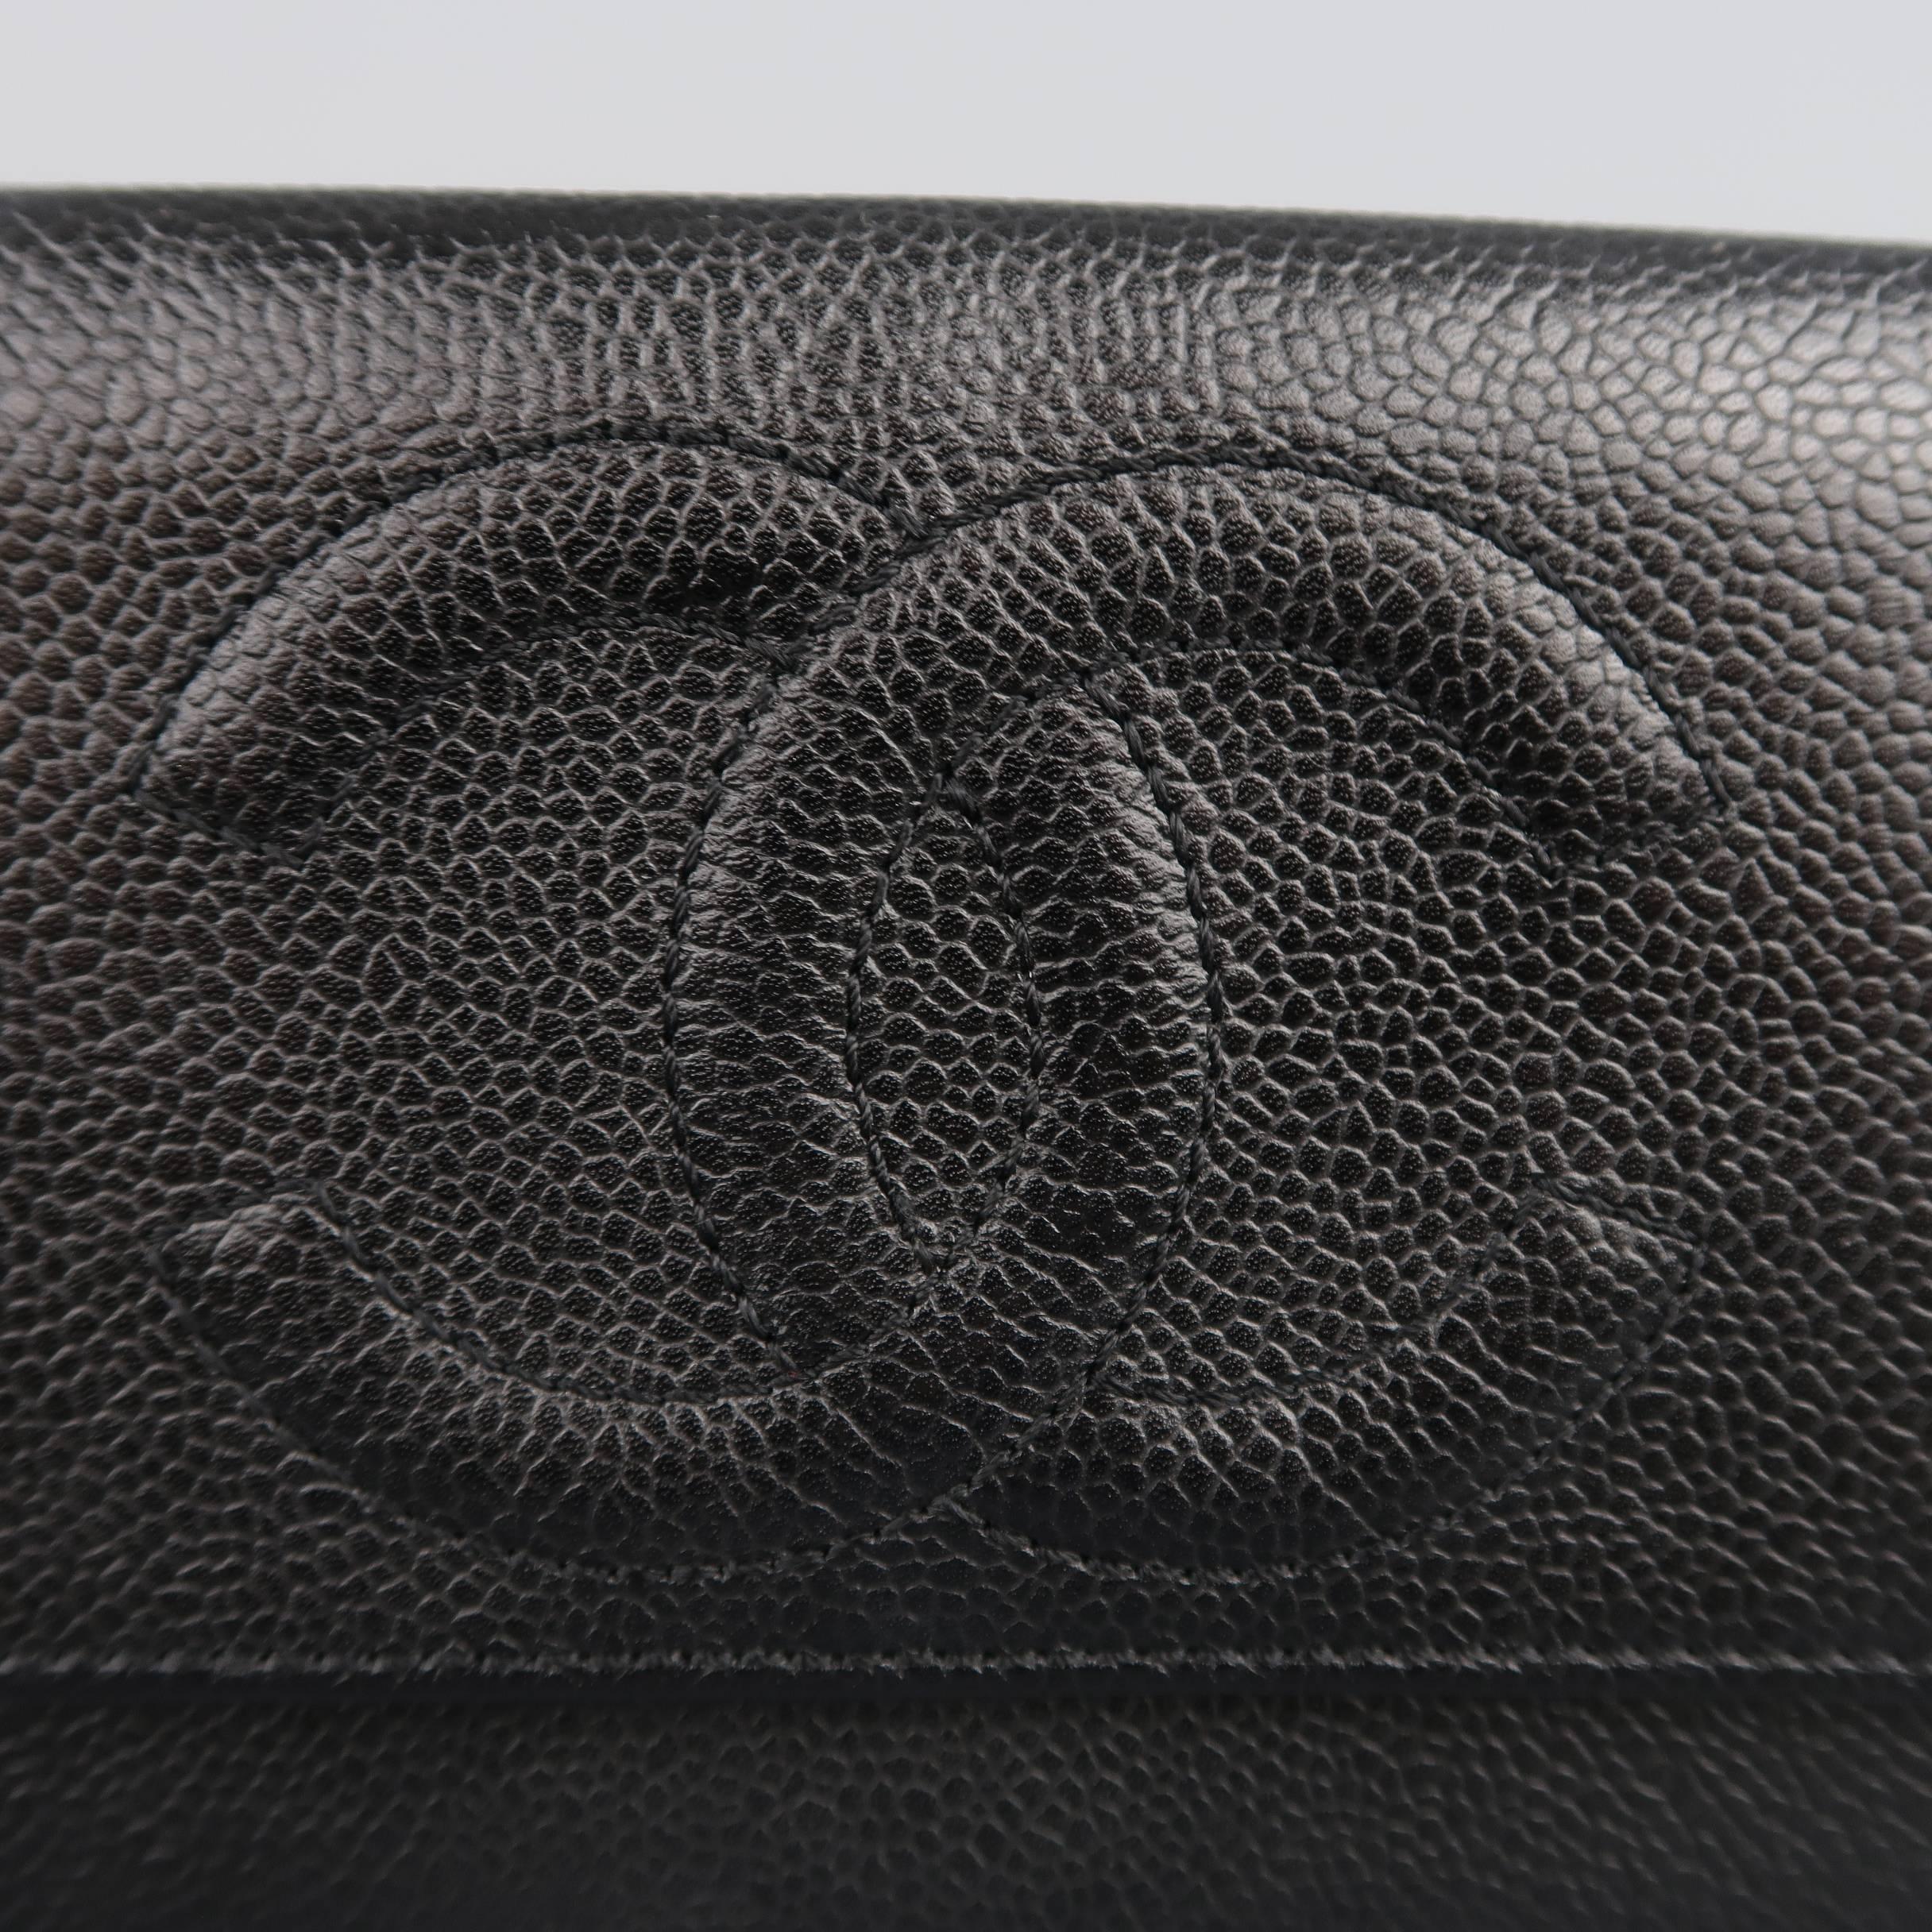 Classic vintage CHANEL envelope wallet comes in black caviar textured leather and features a large embroidered CC logo, flap snap closure, and lots of internal storage. Made in Italy.
 
Good Pre-Owned Condition.
 
Length: 7.75 in.
Width: 0.5